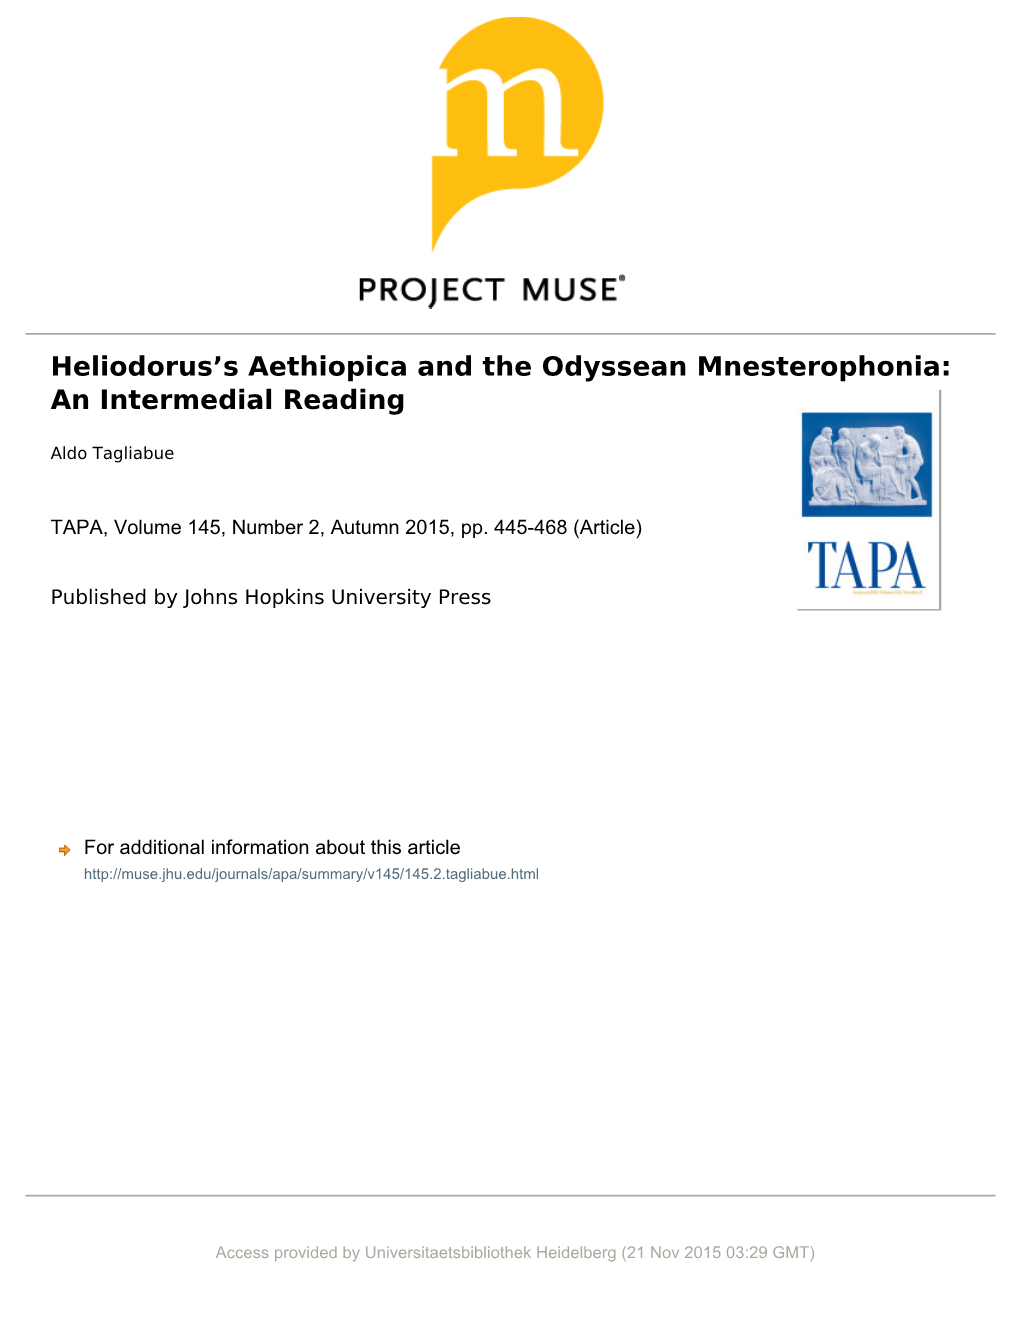 Heliodorusʼs Aethiopica and the Odyssean Mnesterophonia: An